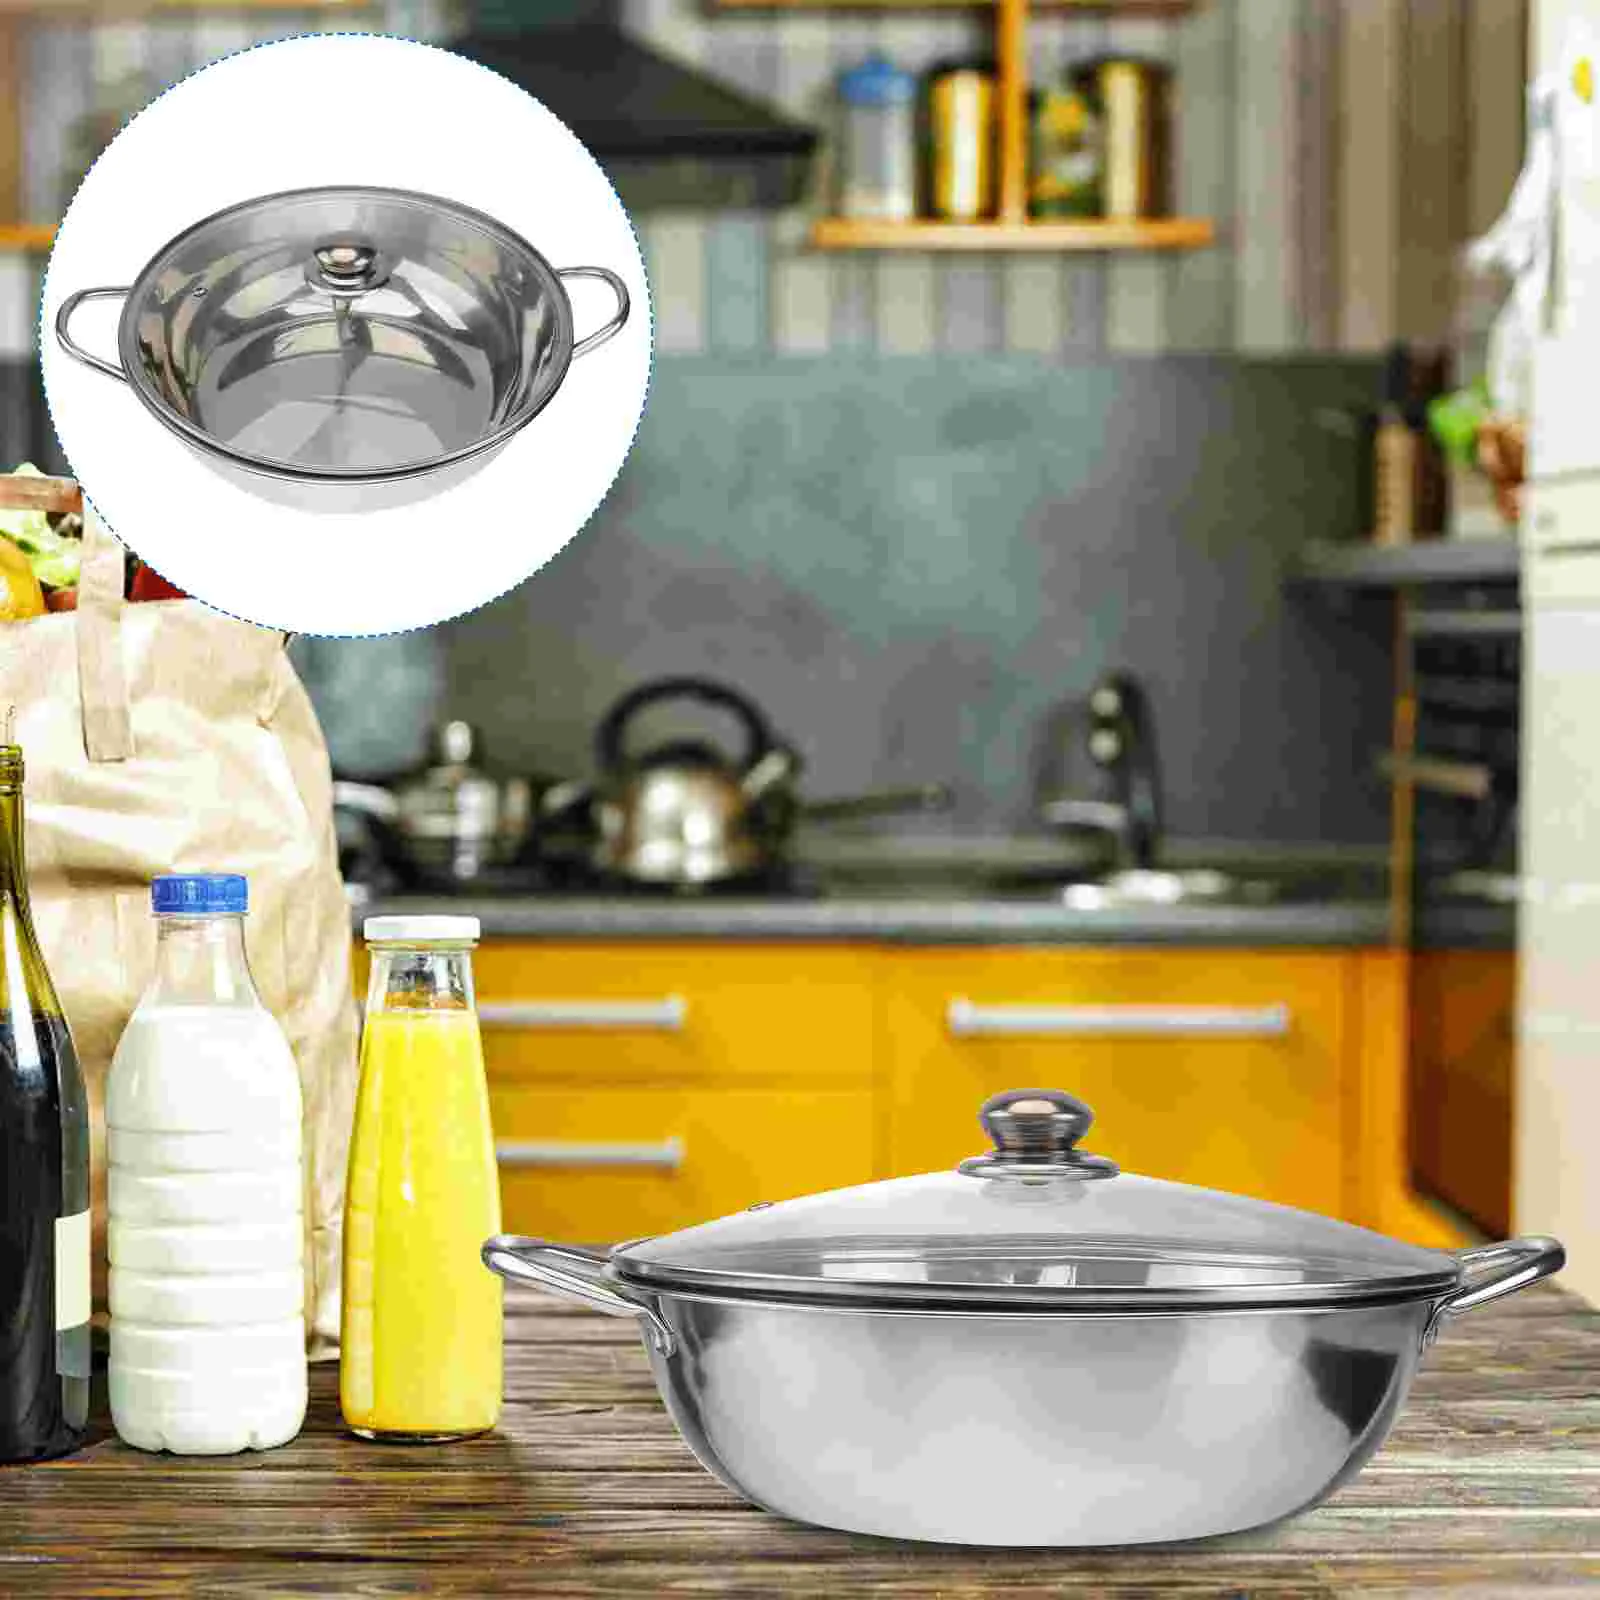 https://ae01.alicdn.com/kf/Sc38d493ca0254955b438f61547ccdeb7t/Divider-Hot-Pot-Shabu-Pot-Stainless-Steel-Divided-Pot-with-Lid-28cm-for-Induction-Cooktop-Gas.jpg